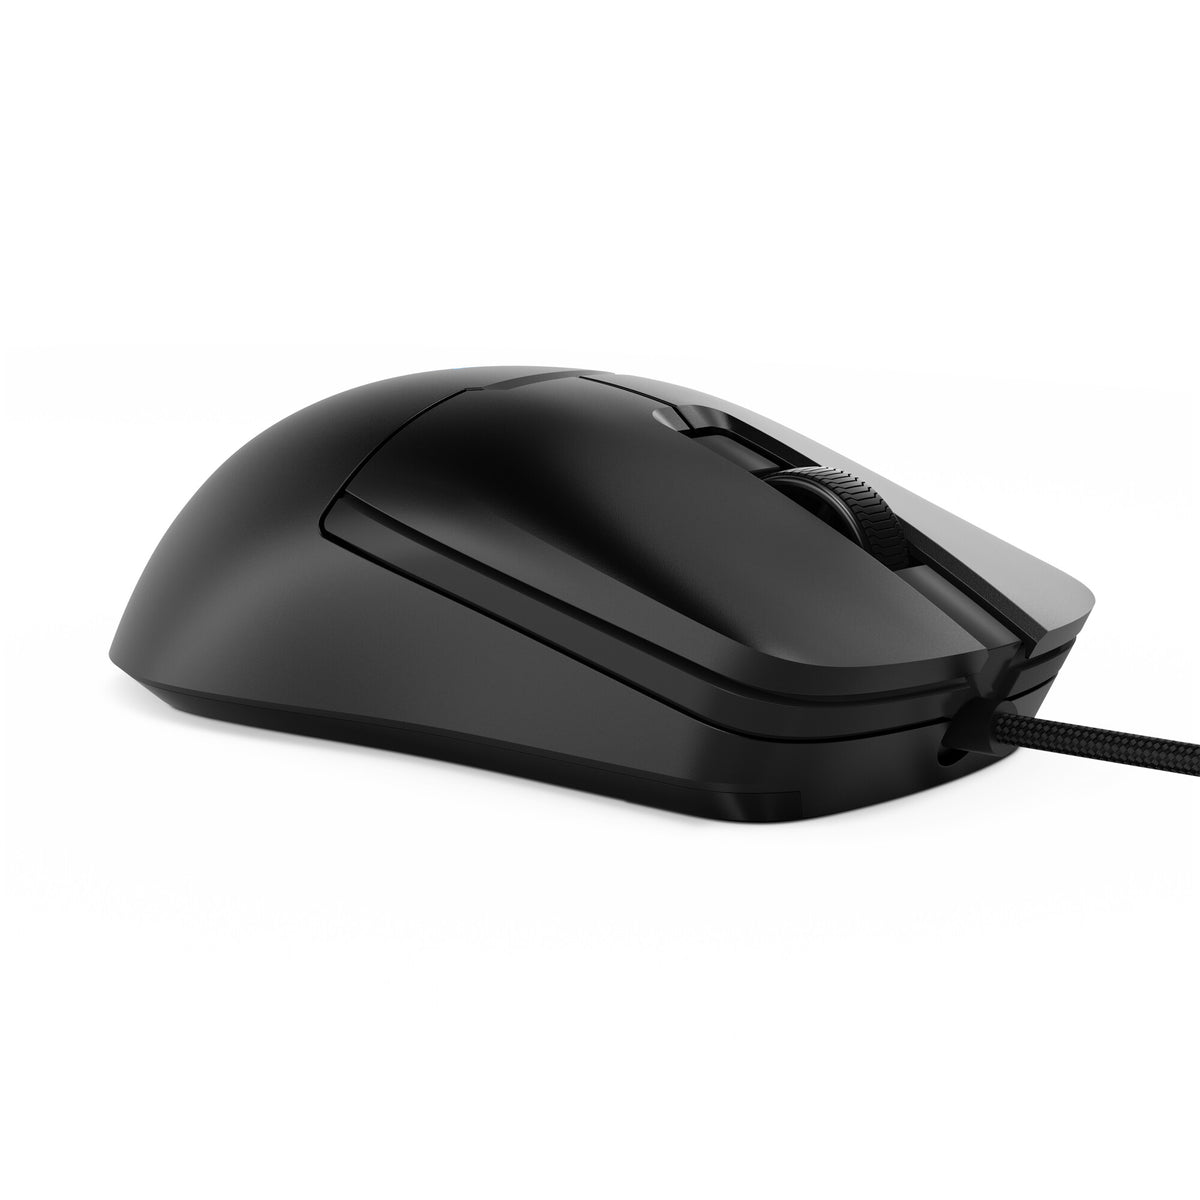 Lenovo Legion M300s - Wired USB Type-A Optical Gaming Mouse in Black - 8,000 DPI